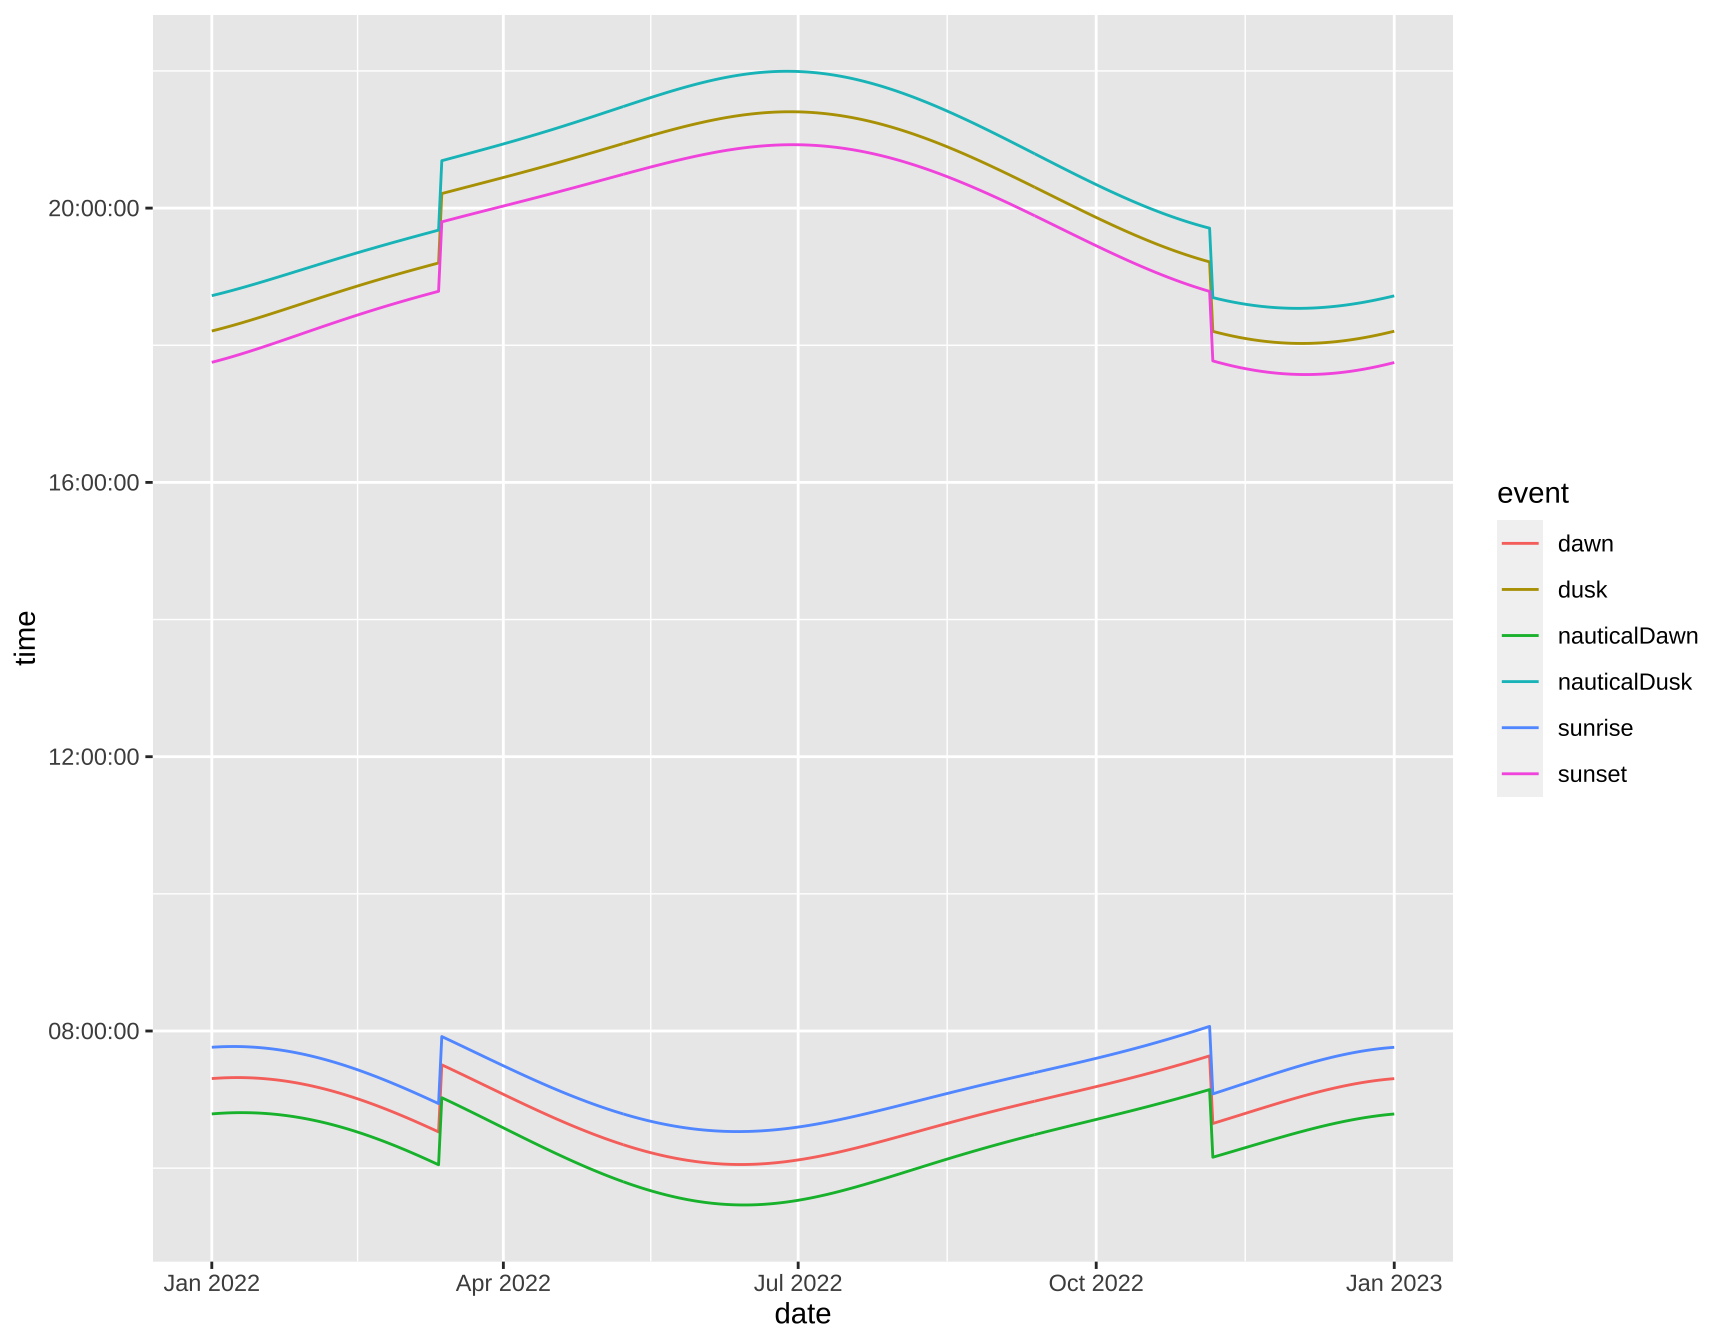 Basic unthemed ggplot2 line plot of sunrise and sunset times for Atlanta, GA. There are six lines, three in the morning for nautical dawn, dawn and sunrise, and three lines in the evening for their corresponding events. Each line has a different color.